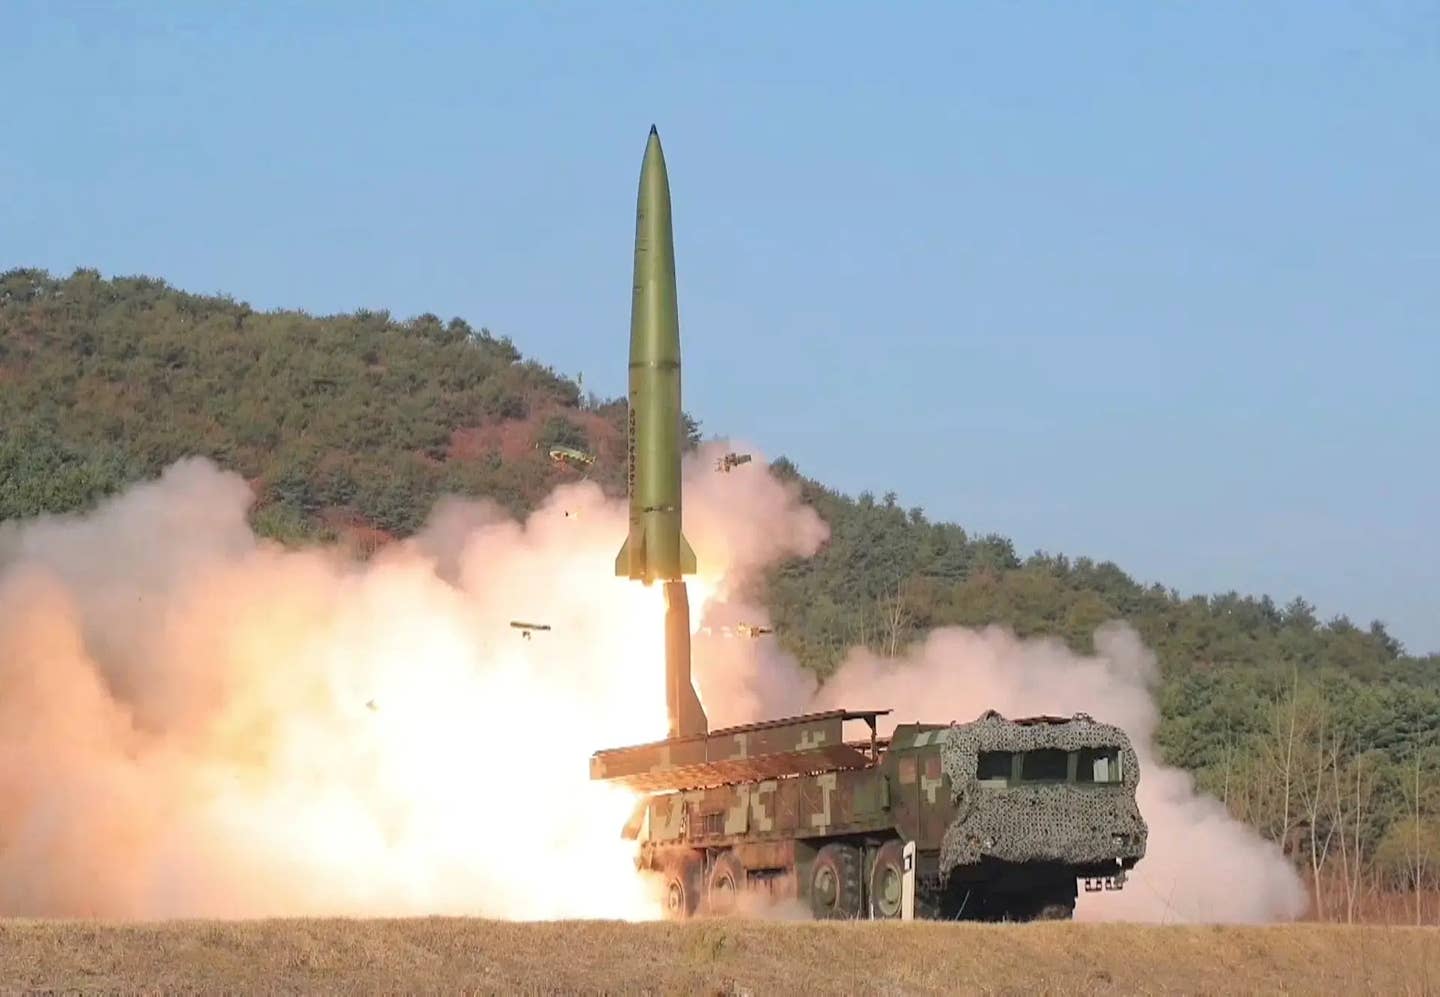 The North Korean KN-23 short-range ballistic missile seen here may be among the types that Russia has received.&nbsp;<em>North Korean State Media</em>